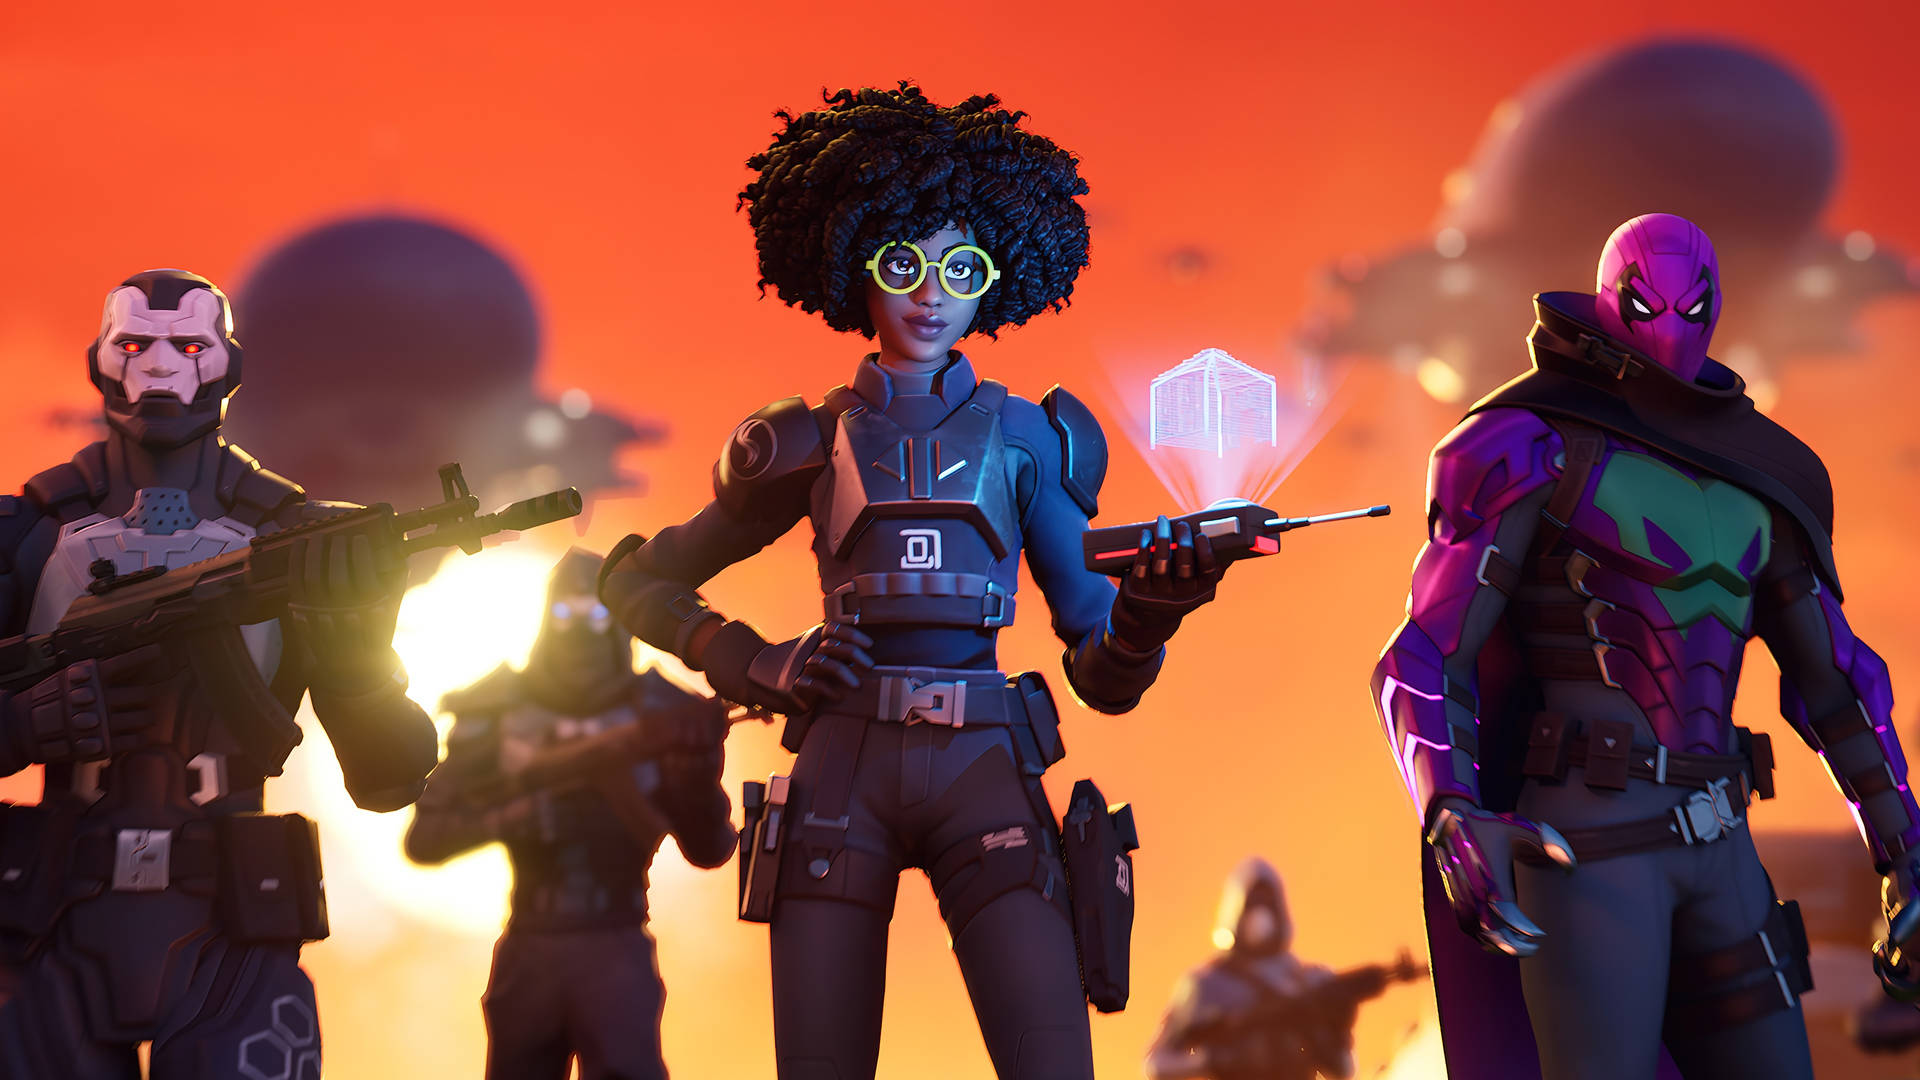 "Explore the new universe of Fortnite Chapter 3" Wallpaper